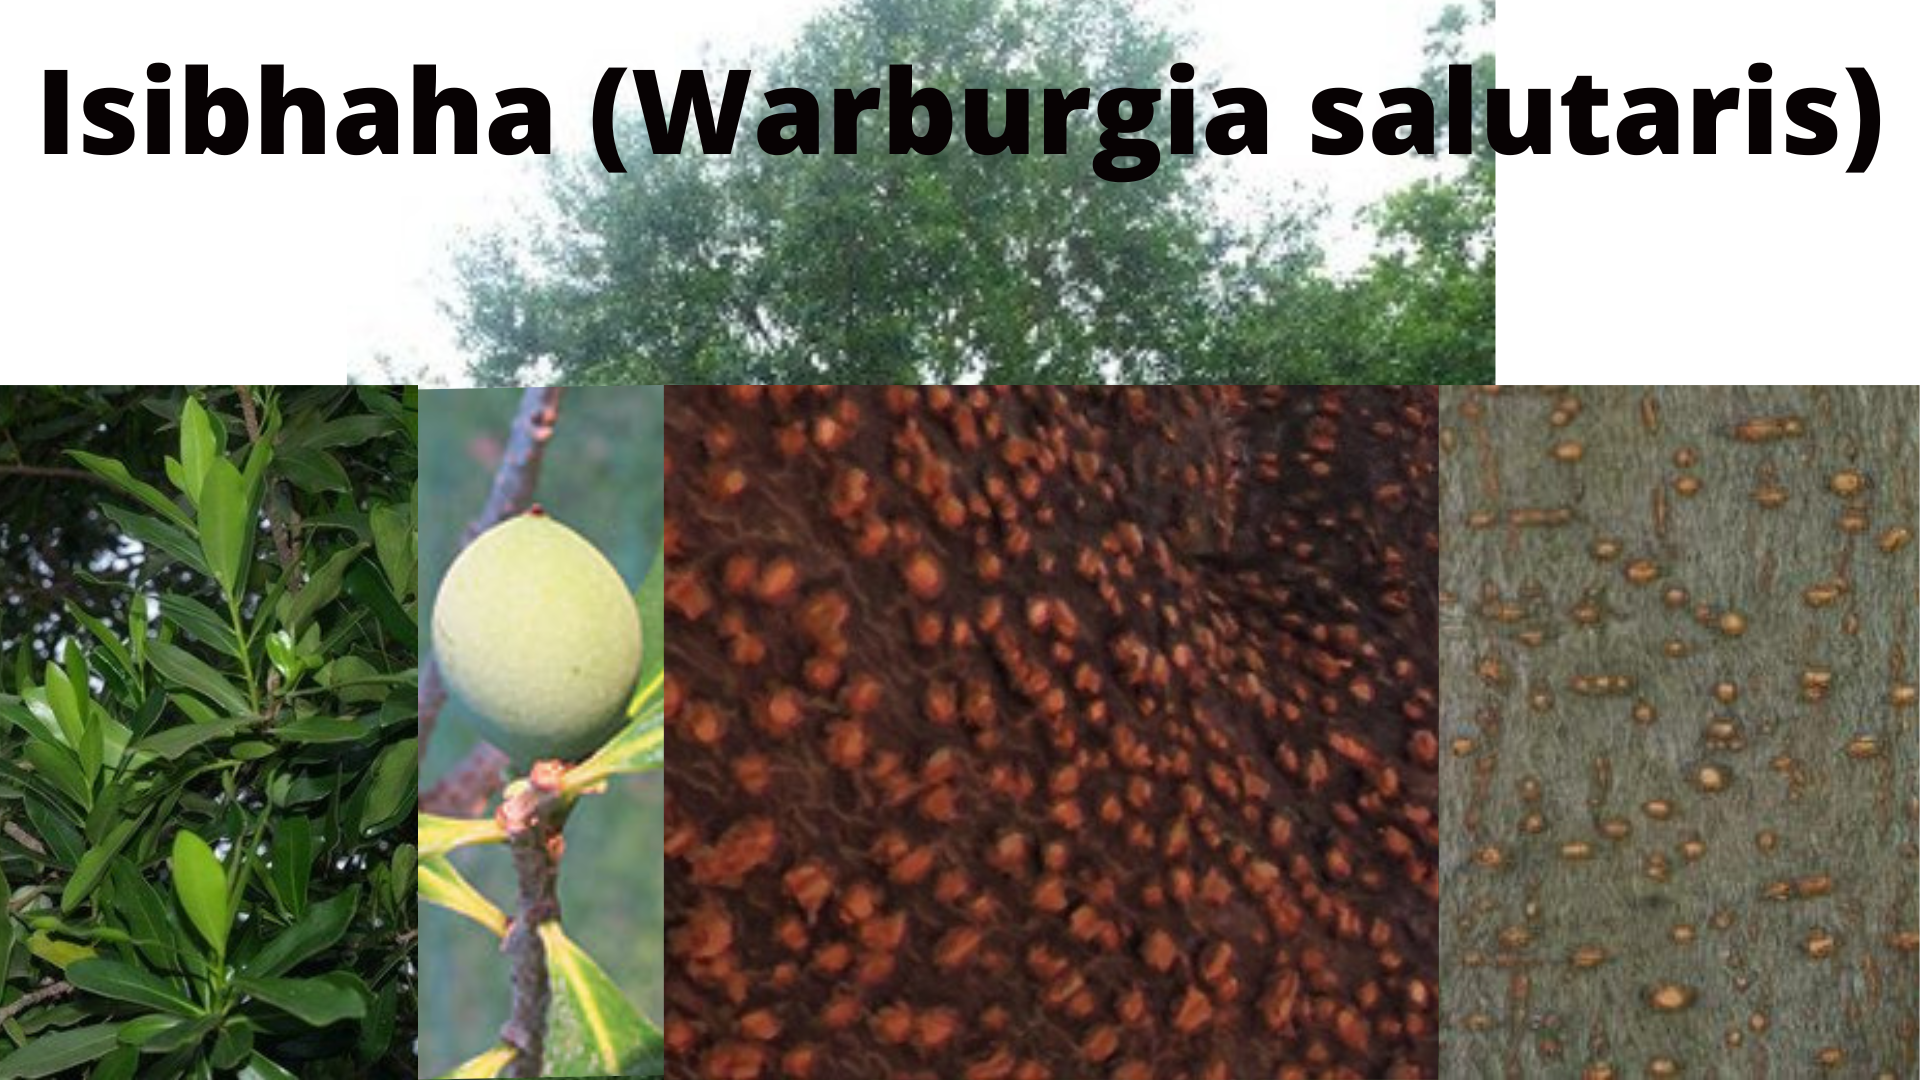 You are currently viewing Warburgia salutaris (Isibhaha)